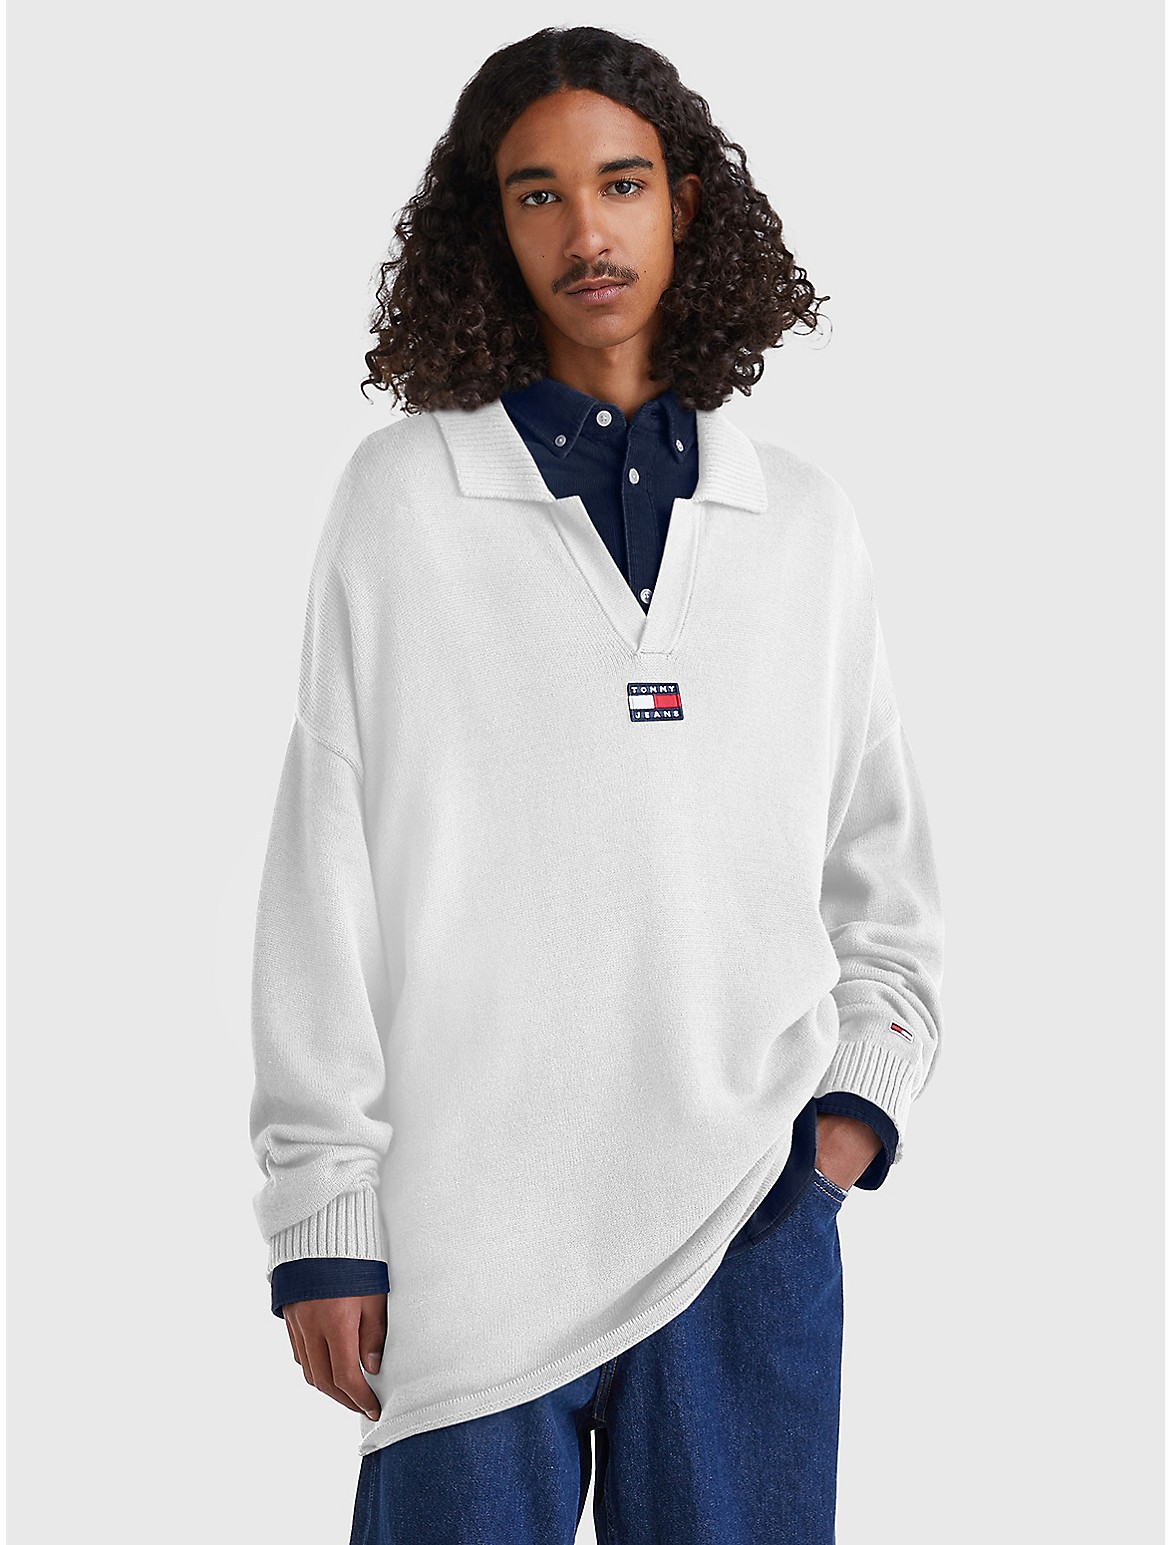 Tommy Hilfiger Skater Polo Sweater In White